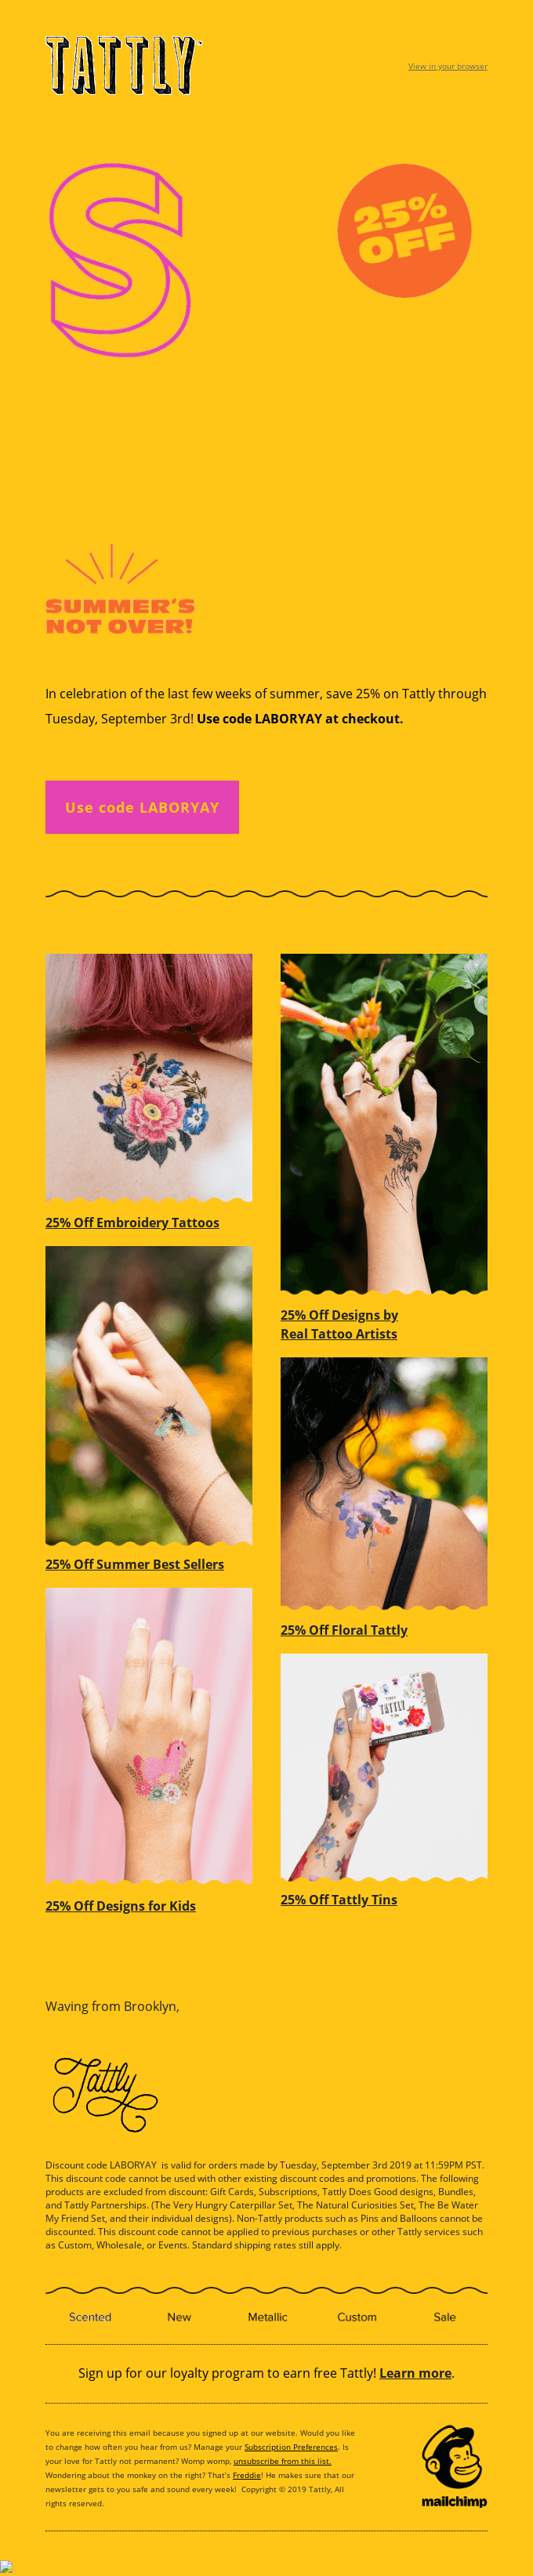 Tattly’s all-yellow Labor Day email